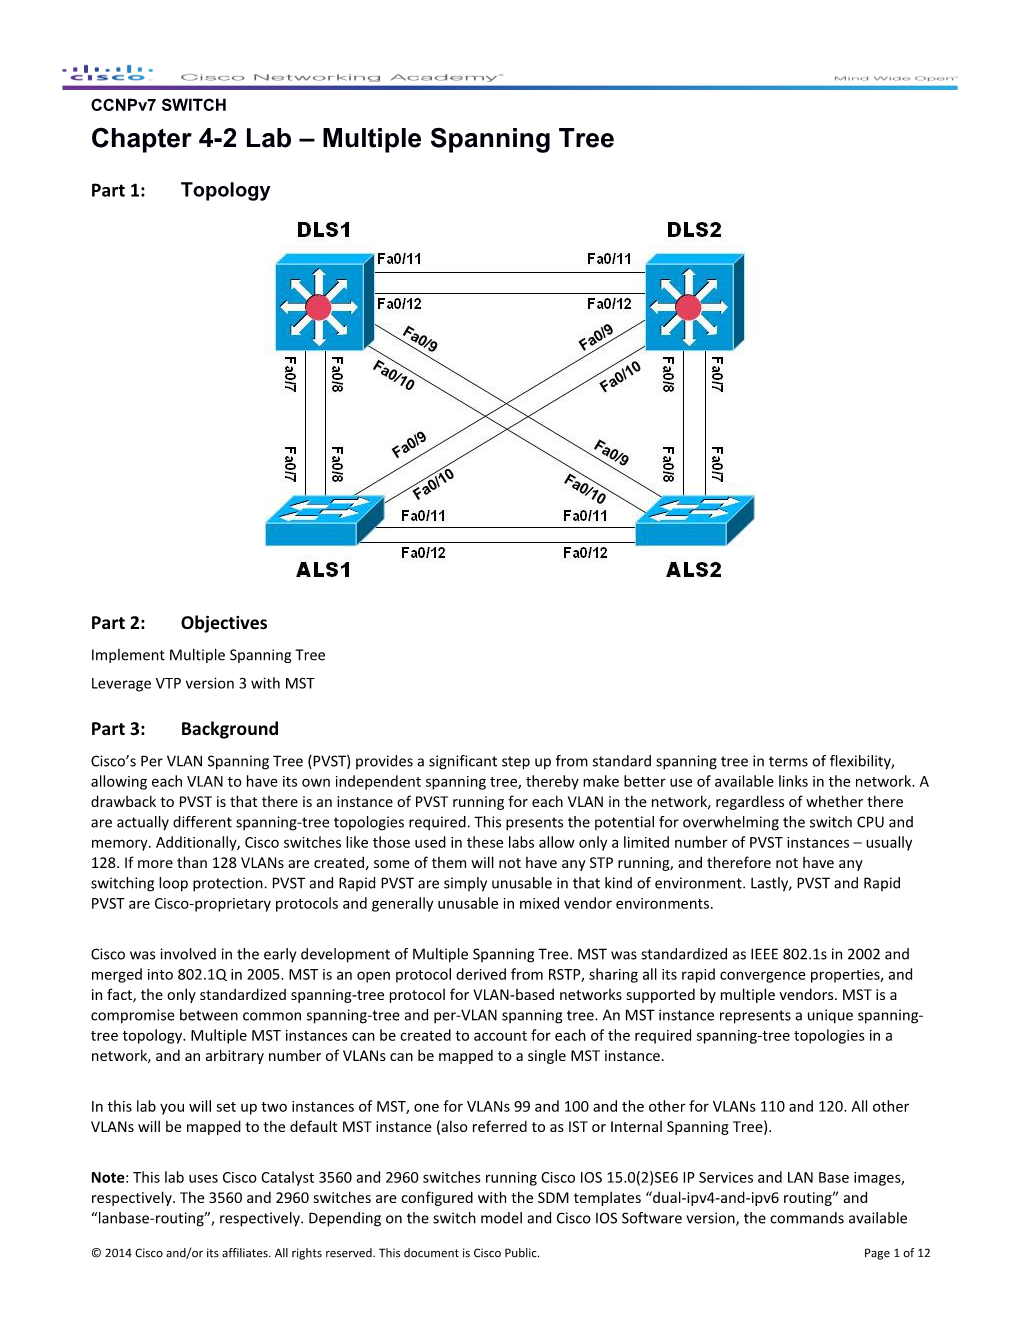 Ccnpv7 SWITCH: Lab 4-2 Multiple Spanning Tree